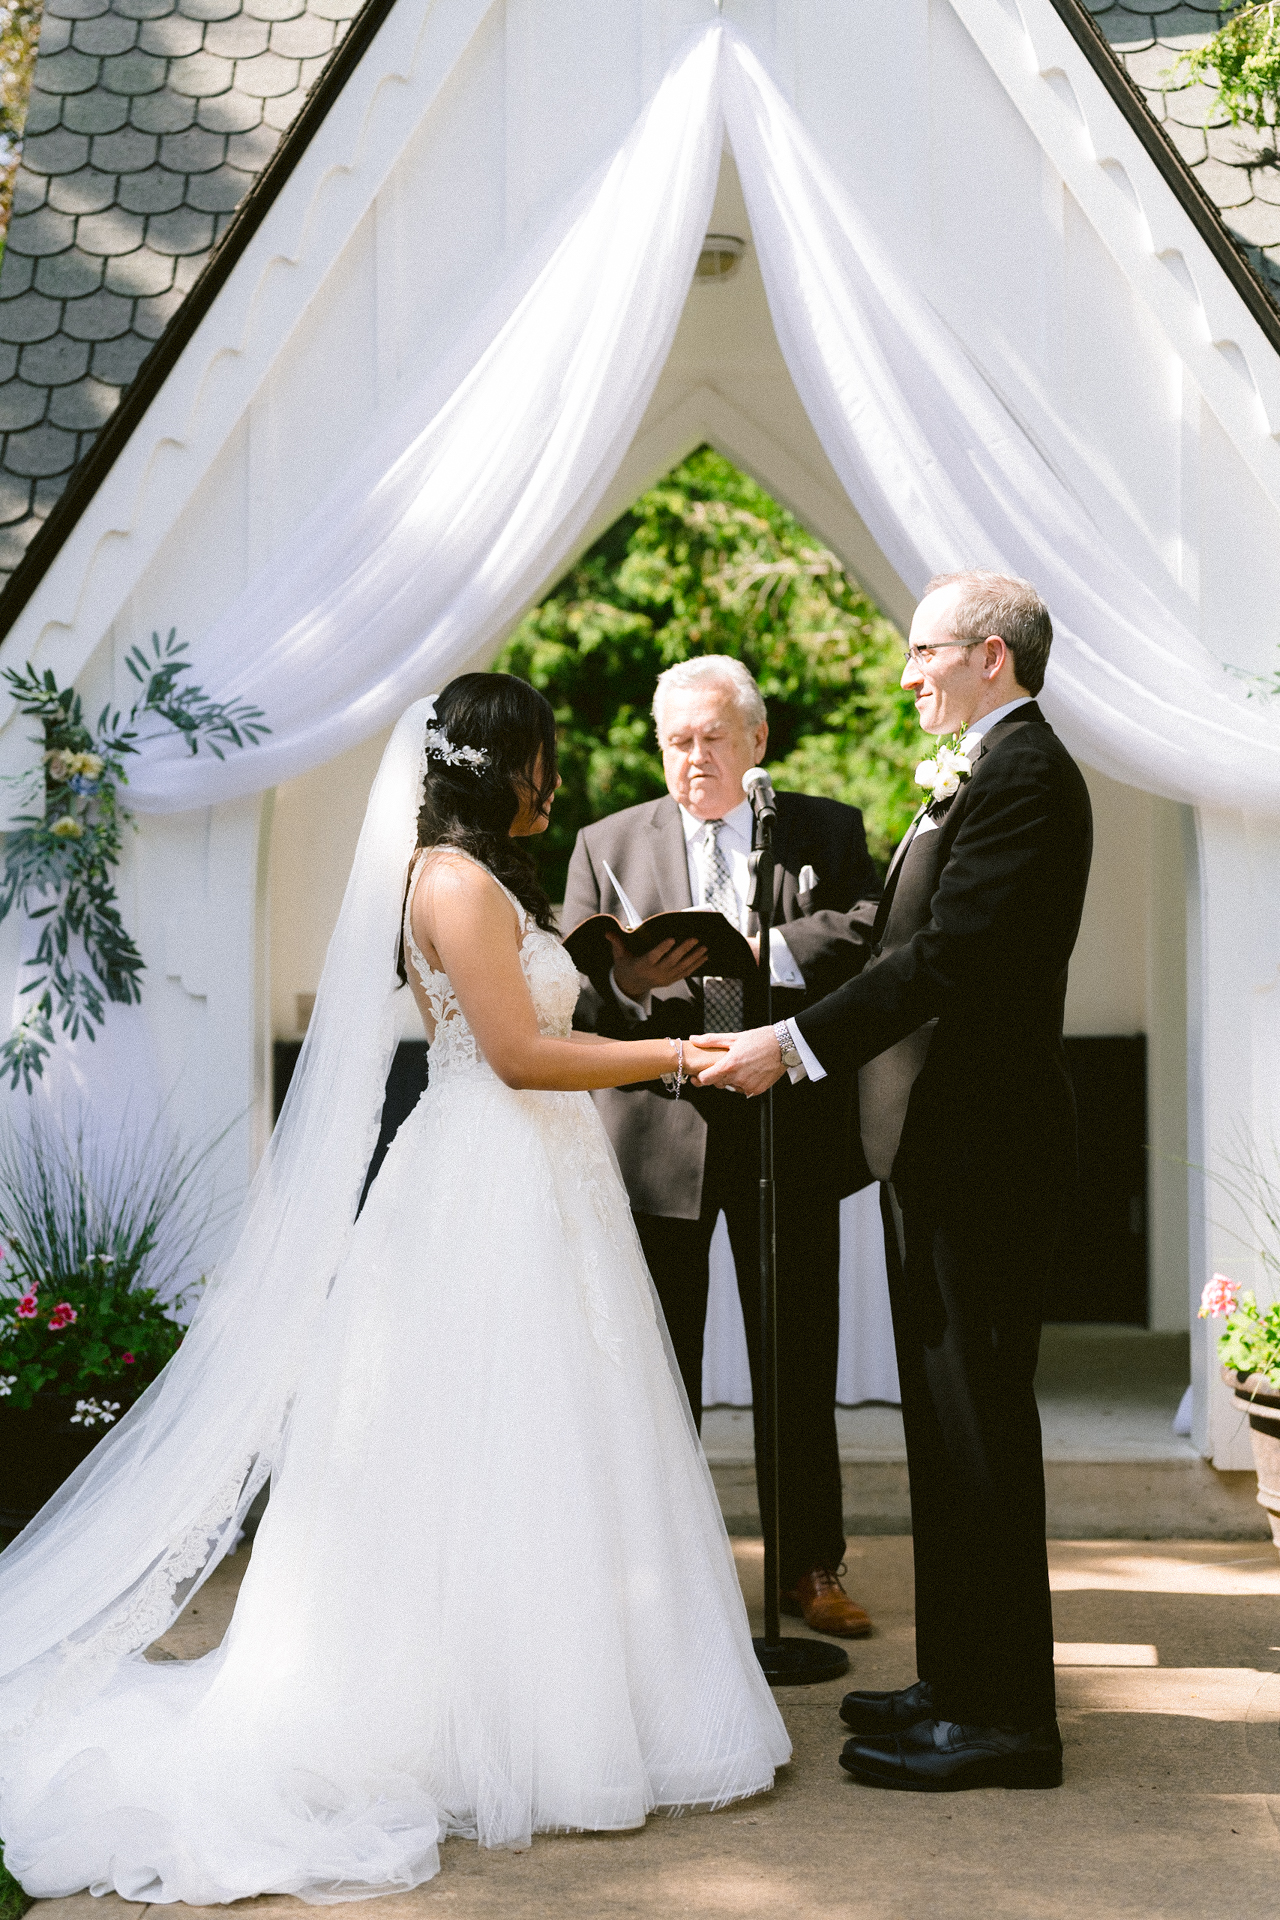 A bride and groom exchanging vows at an outdoor wedding ceremony with an officiant presiding.